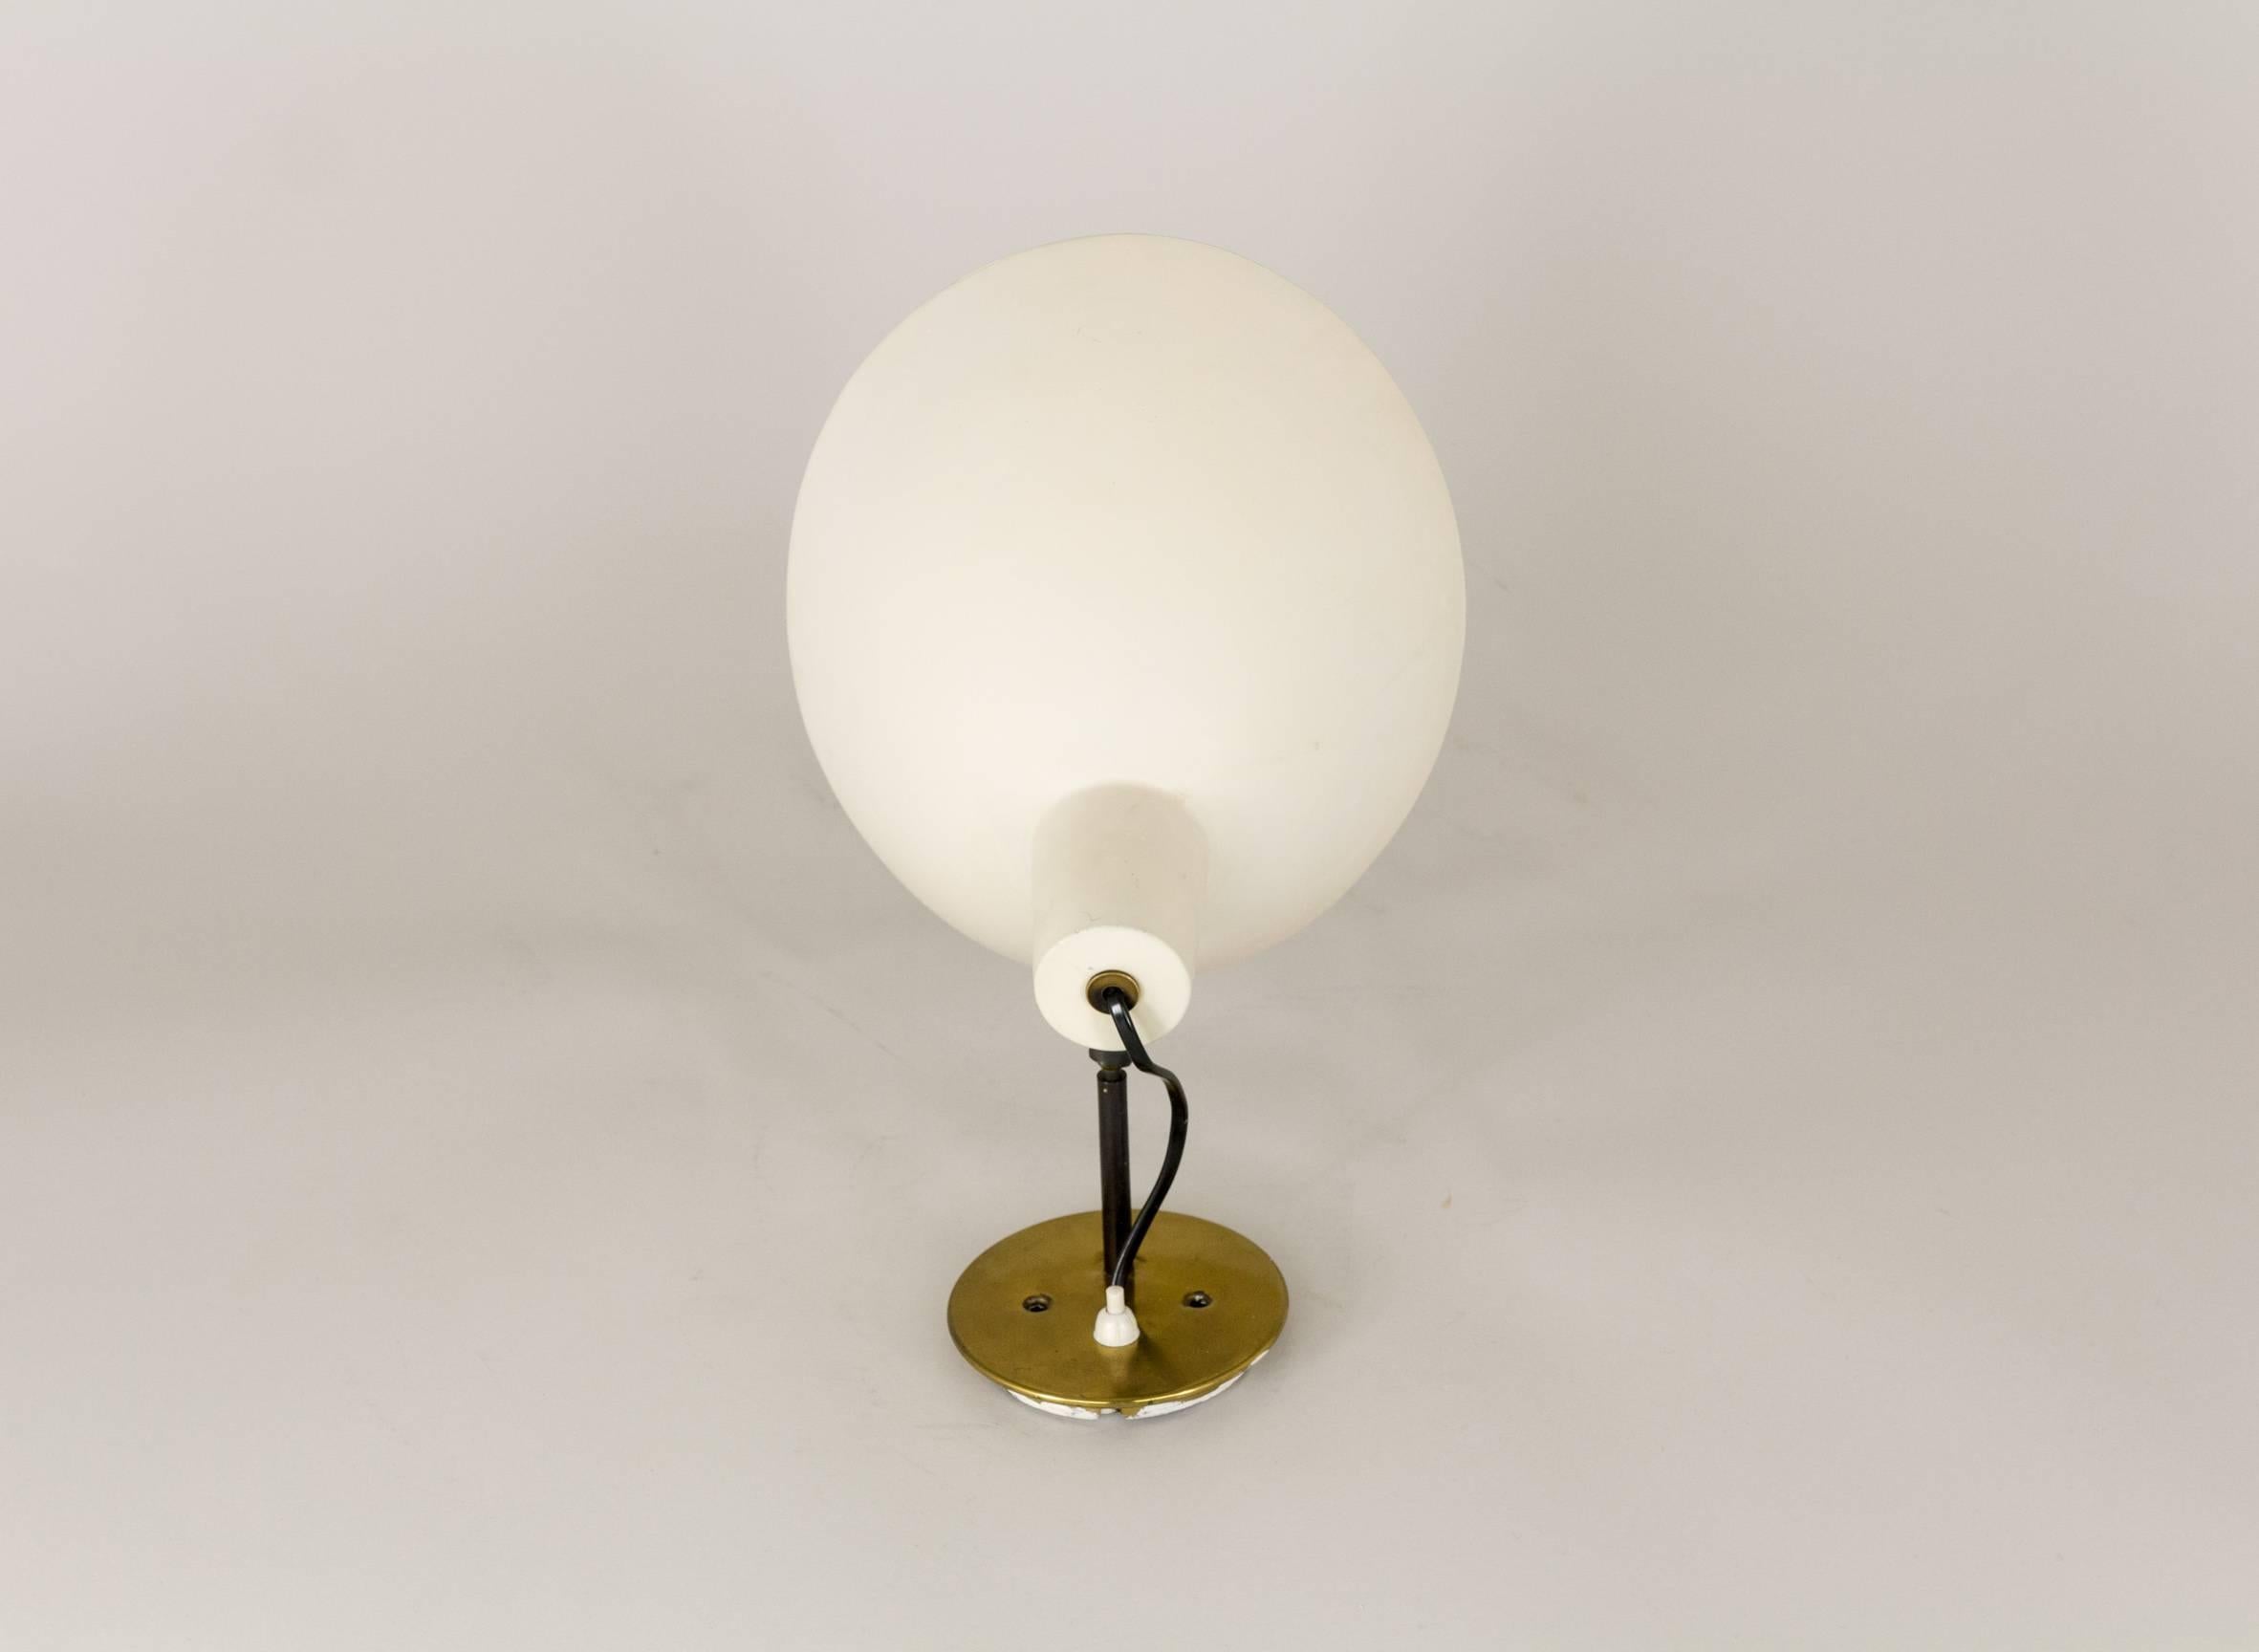 Italian Adjustable Wall Lamp by Vittoriano Viganò for Arteluce, 1950s